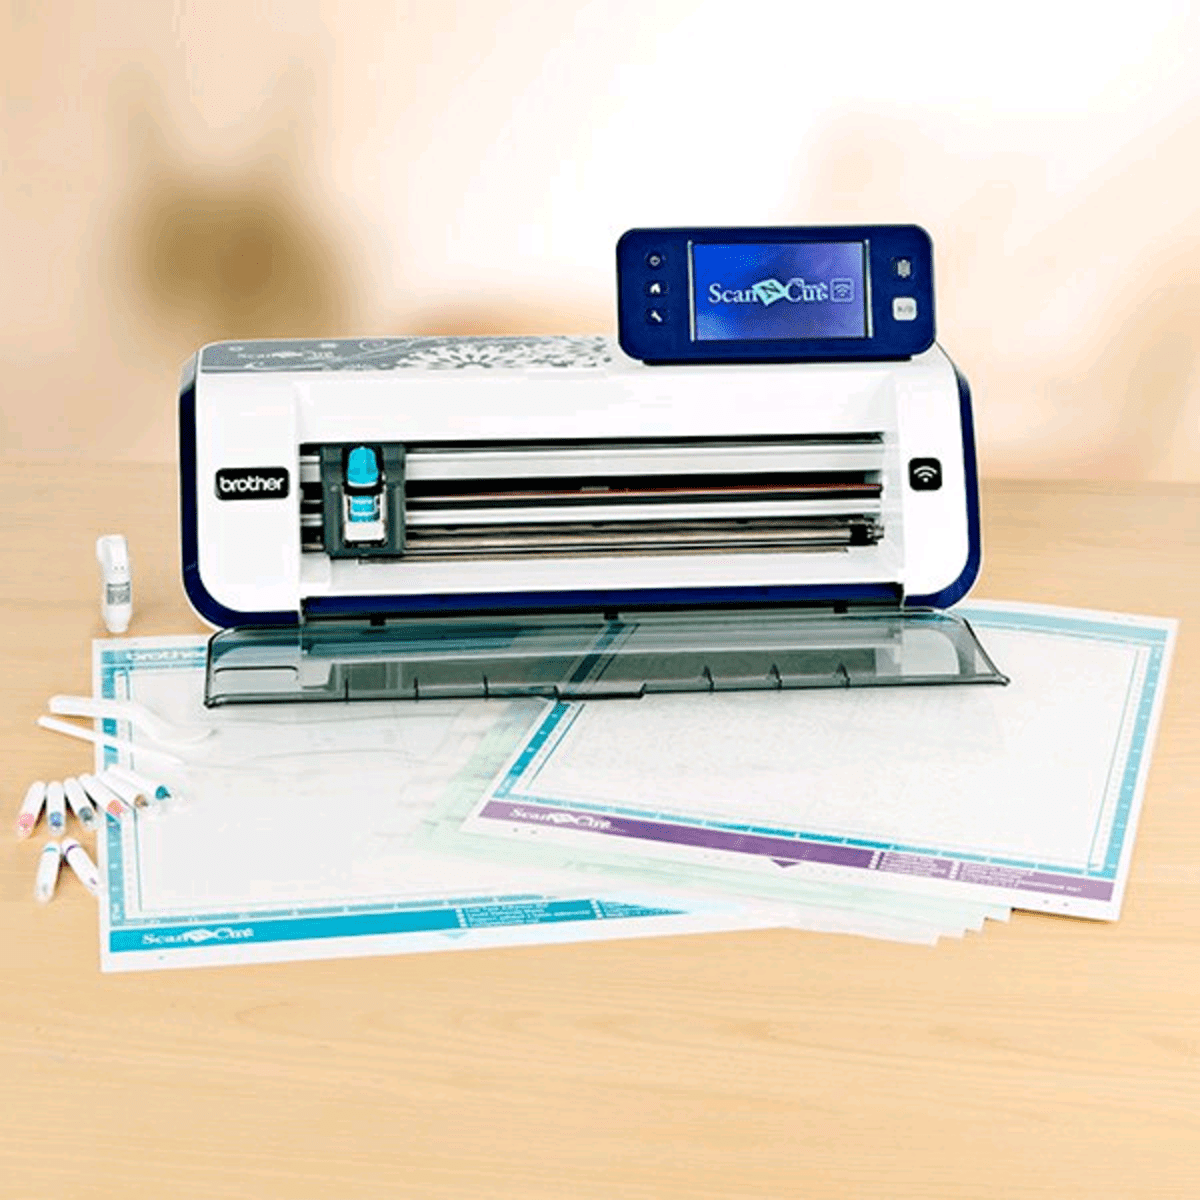 Brother Scan n Cut: How to use the ScanNCut Photo Scanning Mat